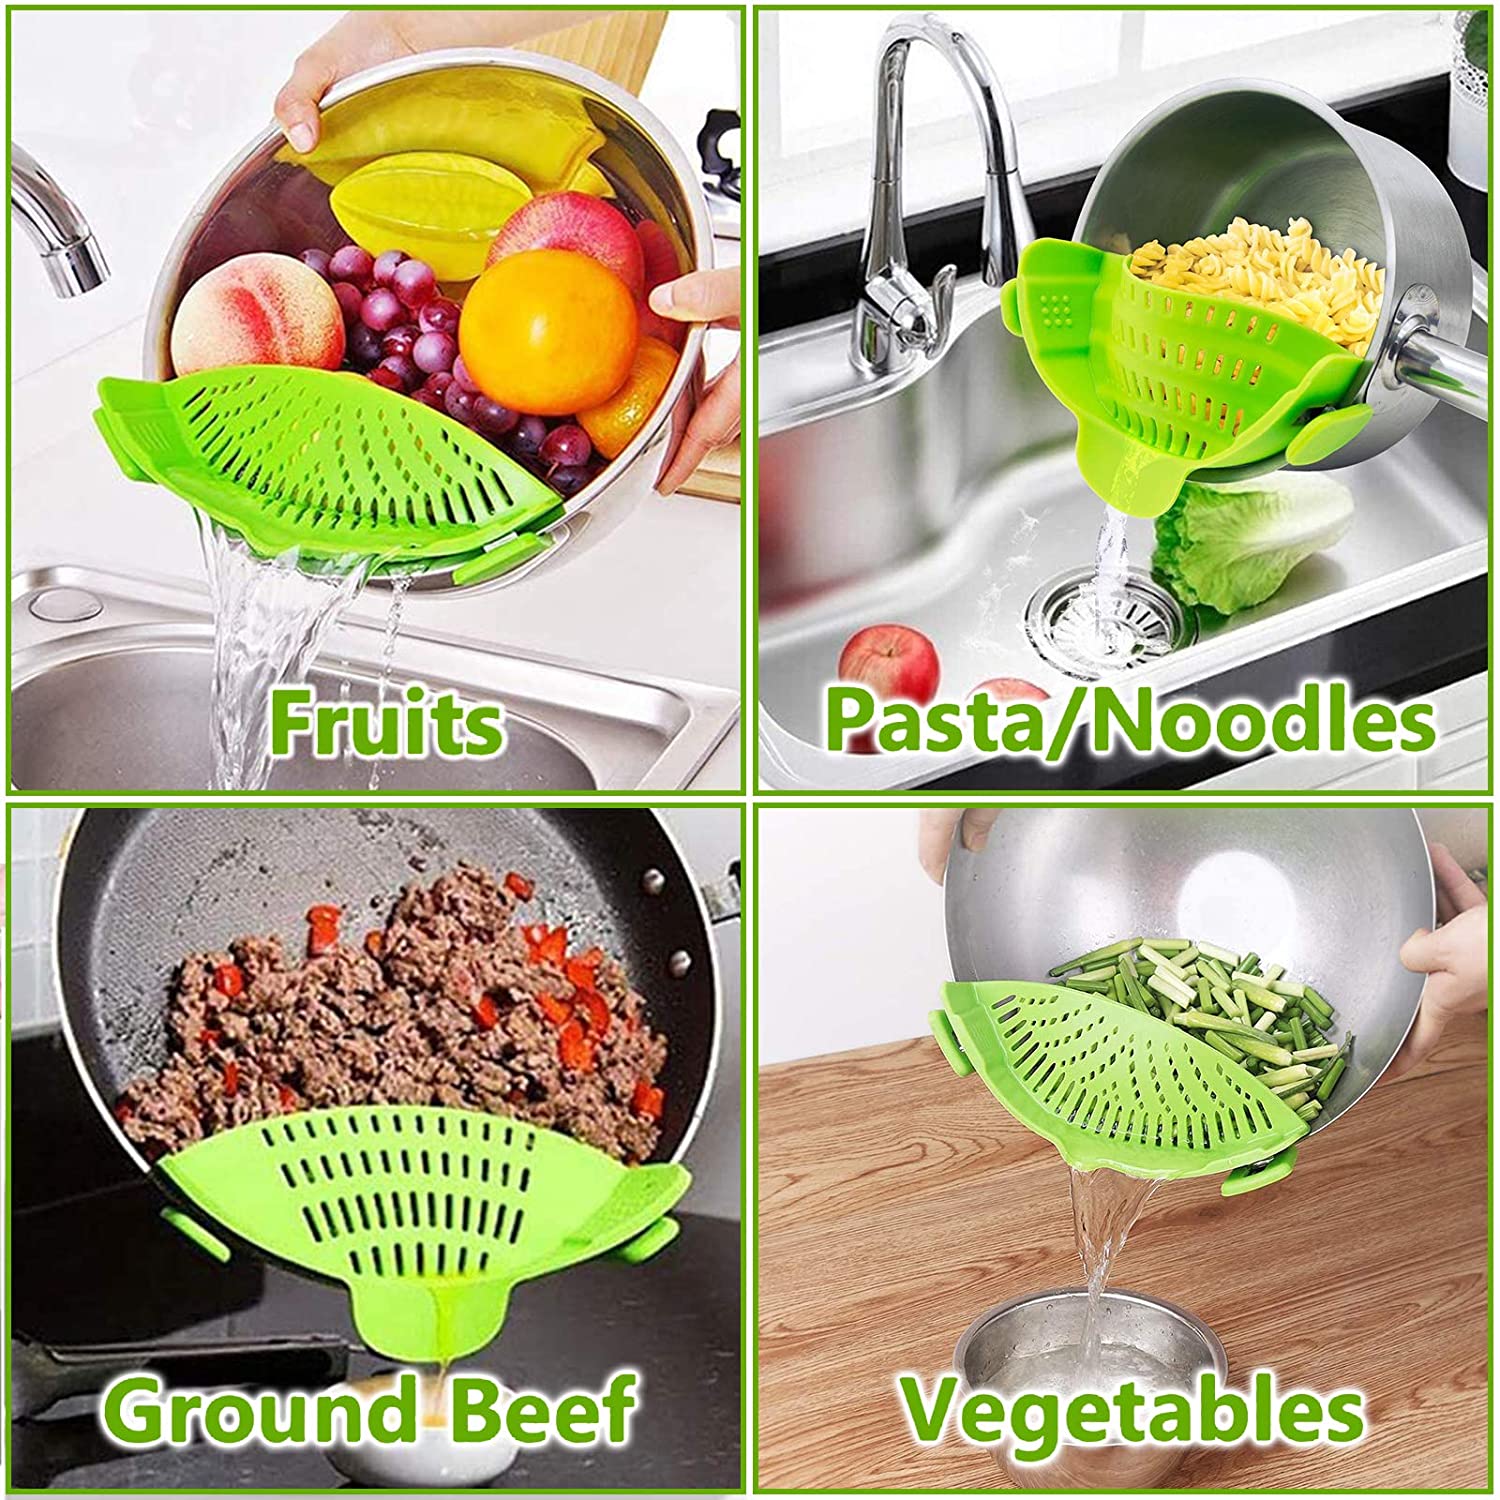 VICVEO Silicone Clip on Strainer, Patented Clip on Silicone Colander, Clip-on Kitchen Food Strainer for Pasta,Fits Almost Pots (Green) - image 2 of 8